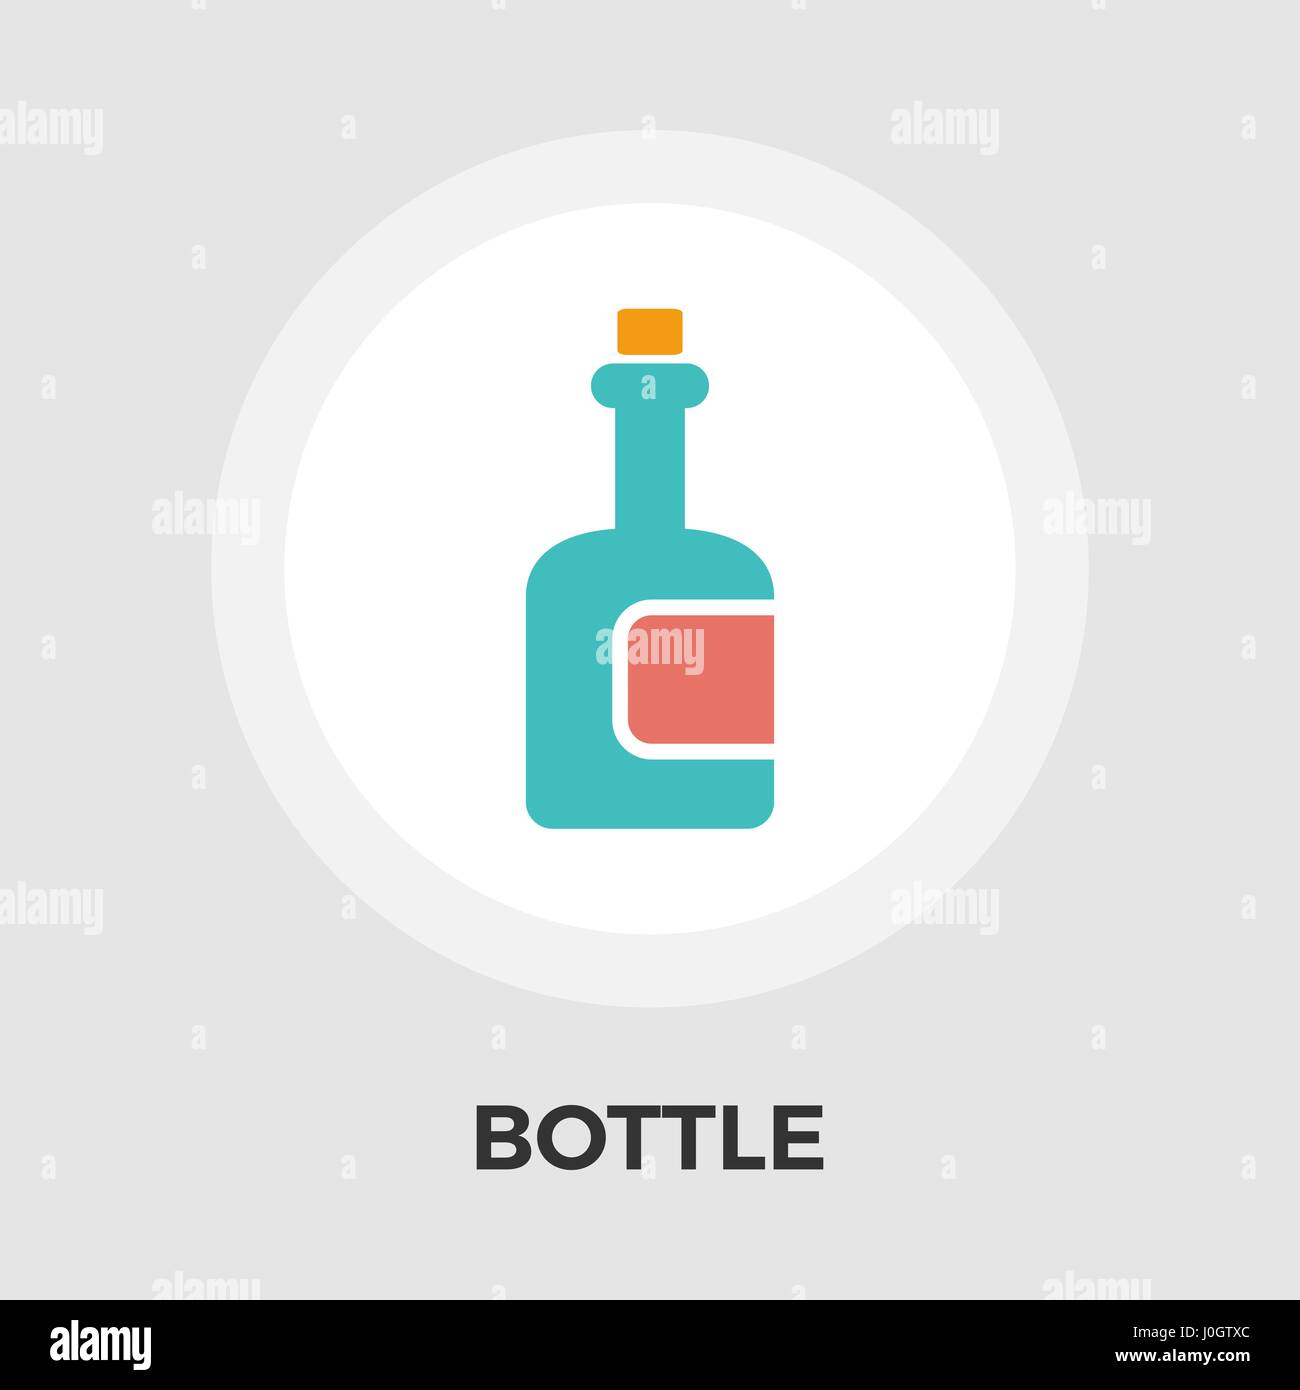 Bottle icon vector. Flat icon isolated on the white background. Editable EPS file. Vector illustration. Stock Vector